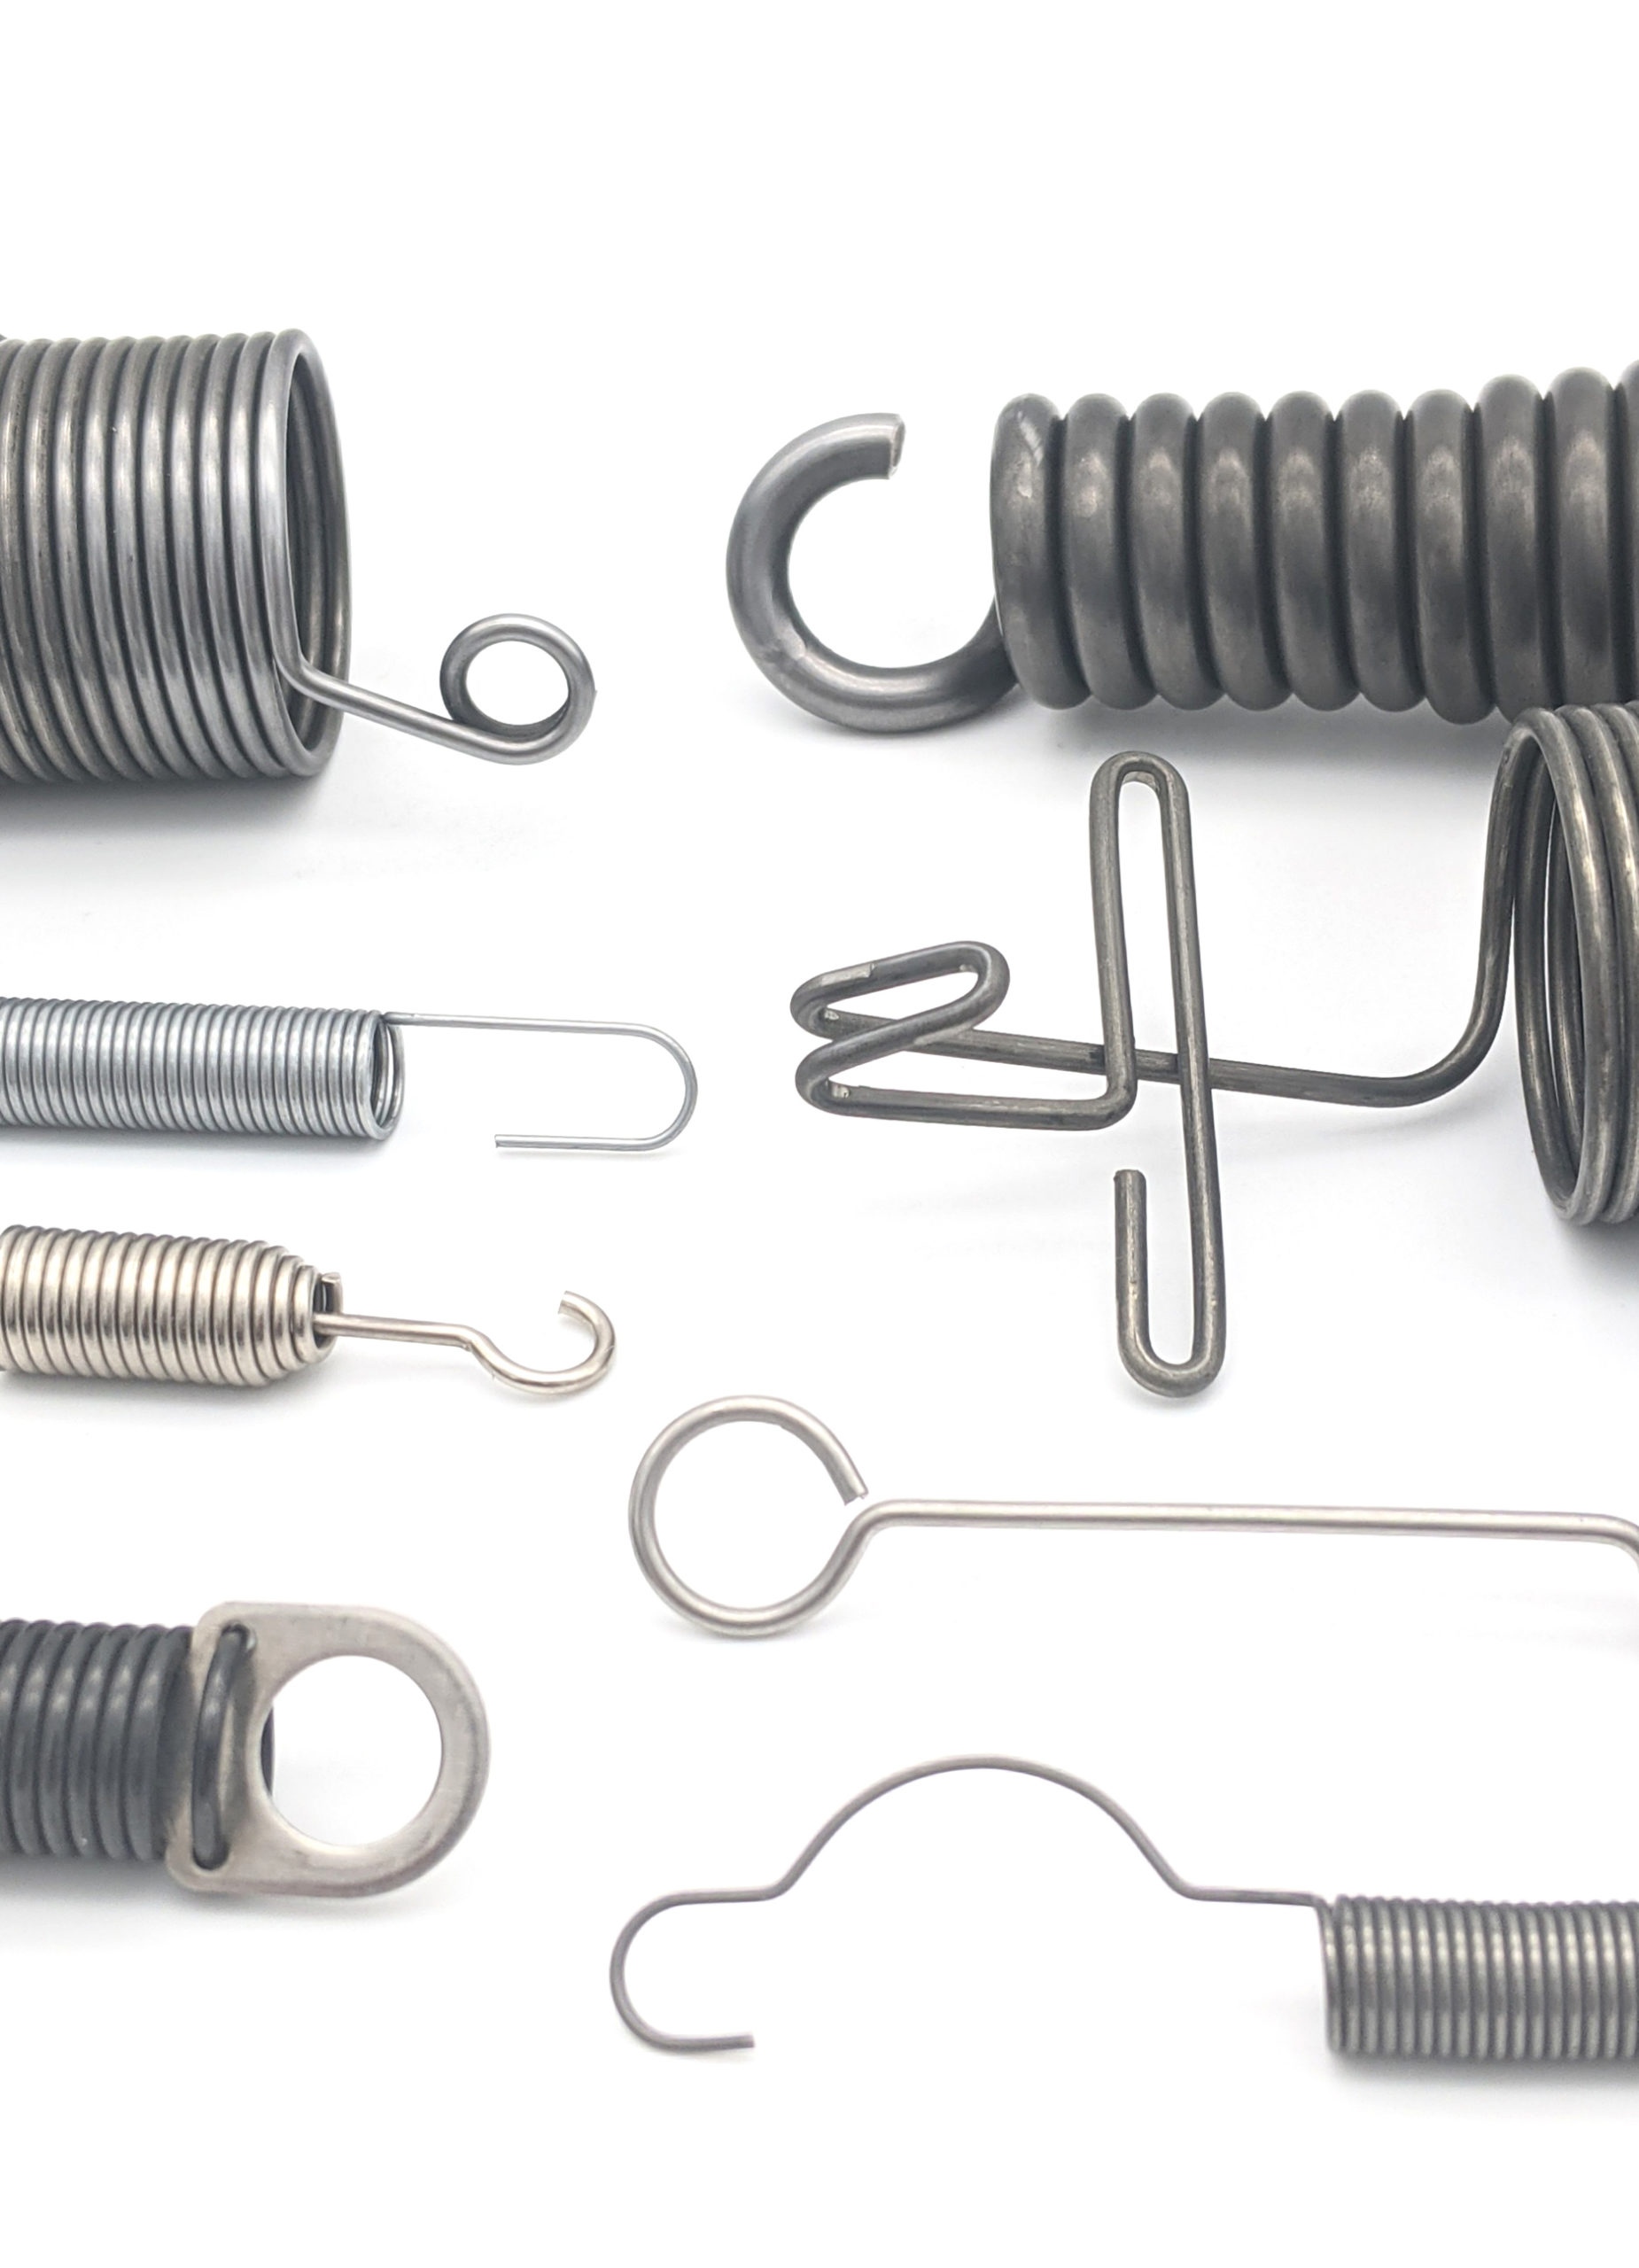 https://www.dropbox.com/home/Fathom/Extension%20Springs?preview=Assorted+Hooks.jpg /extension-spring-hooks.jpg N/A Eight types of tension spring hooks